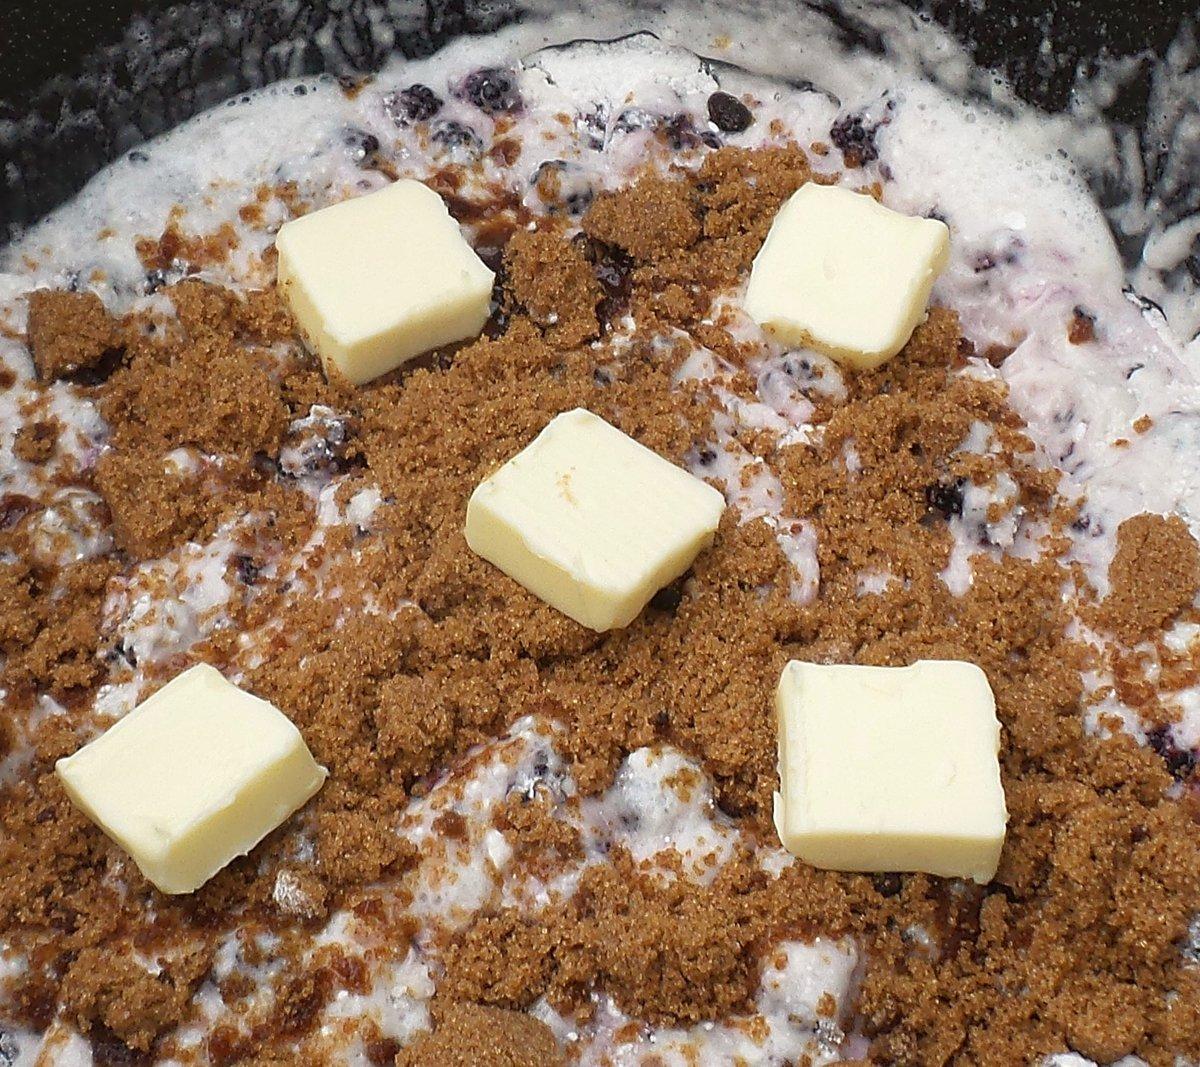 Simply add all the pre-measured ingredients to the Dutch oven, top with the cake mix, brown sugar and butter, then bake.